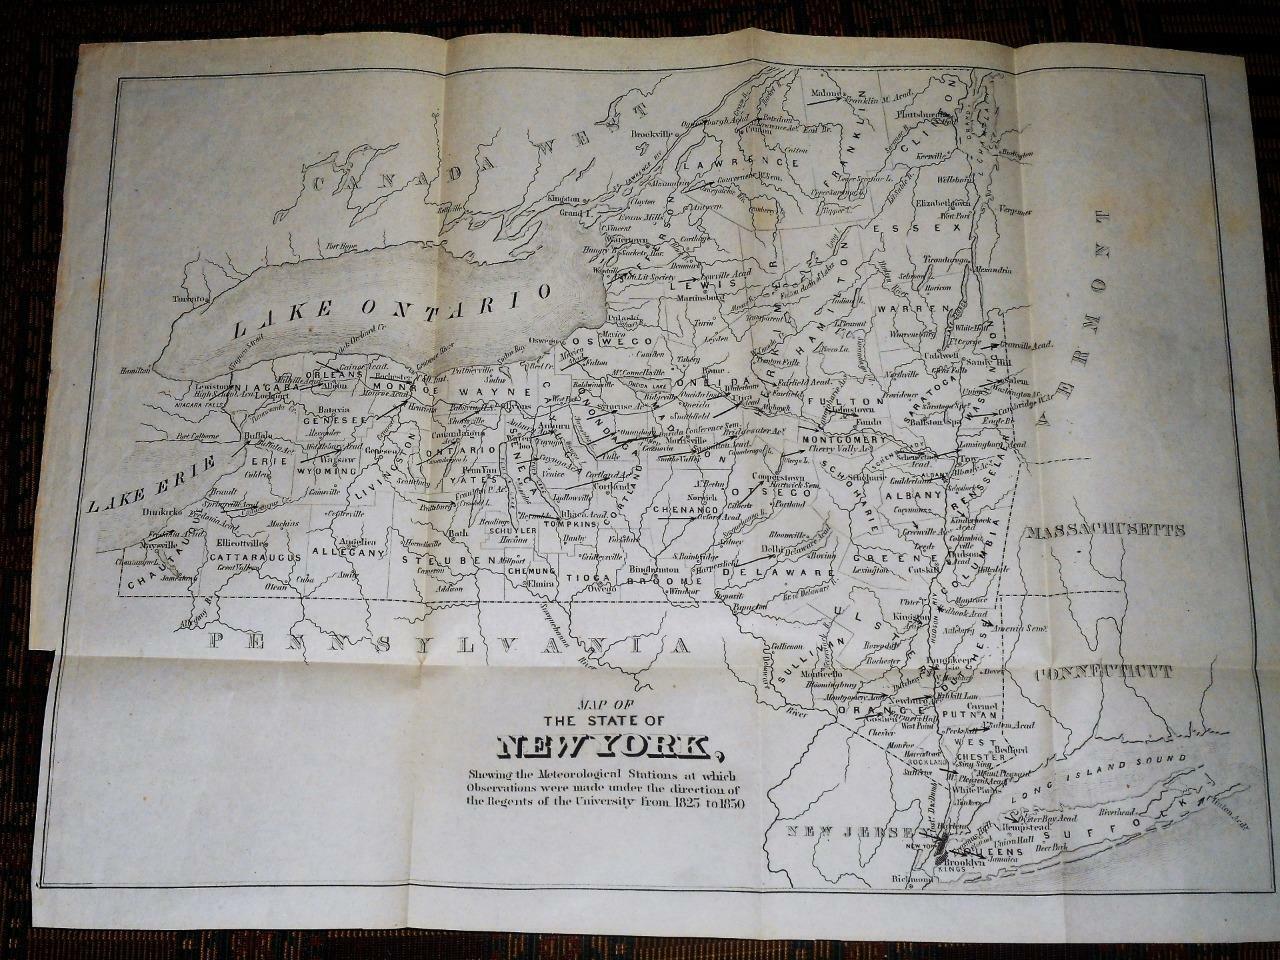 1855 New York State map meteorological stations 1825 to 1850, 14.5" x 11"